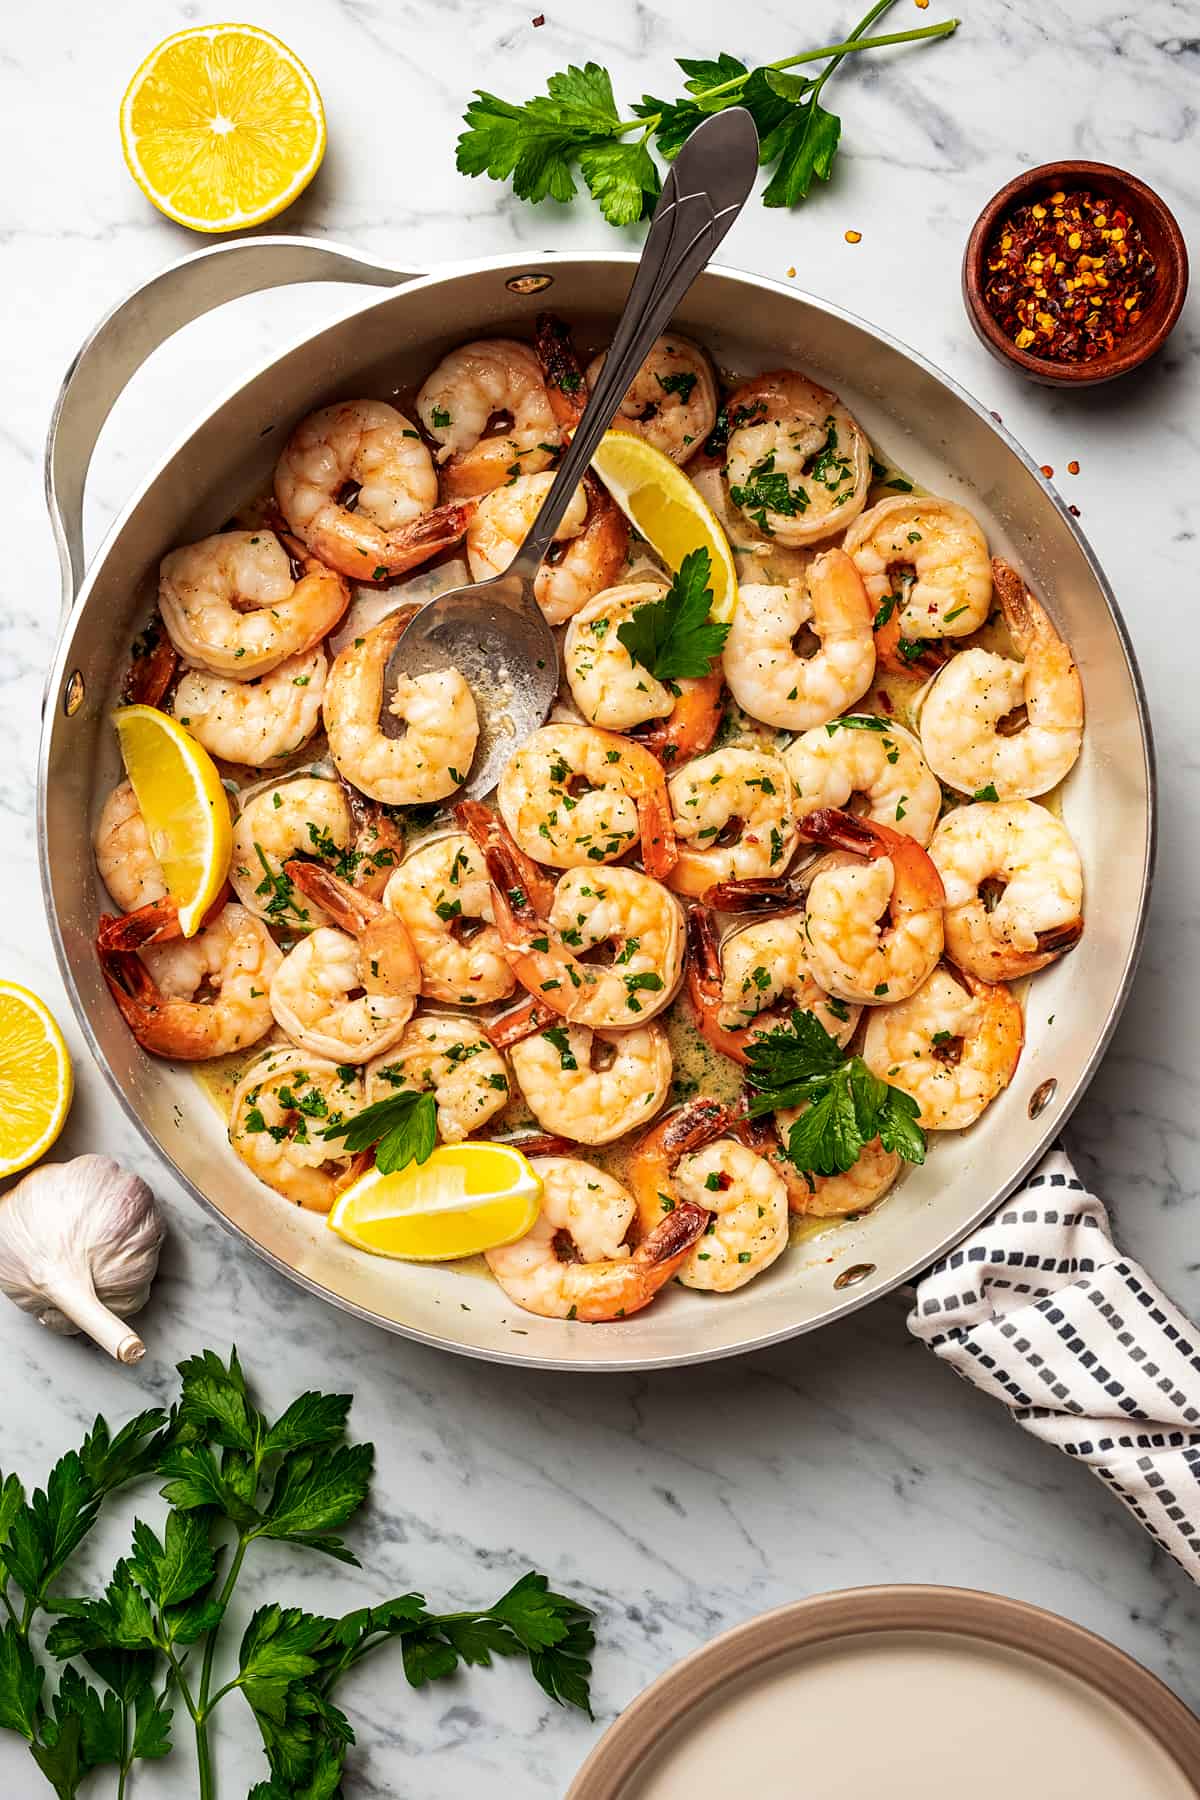 Shrimp scampi in a skillet, with a big spoon placed inside to spoon out shrimp.